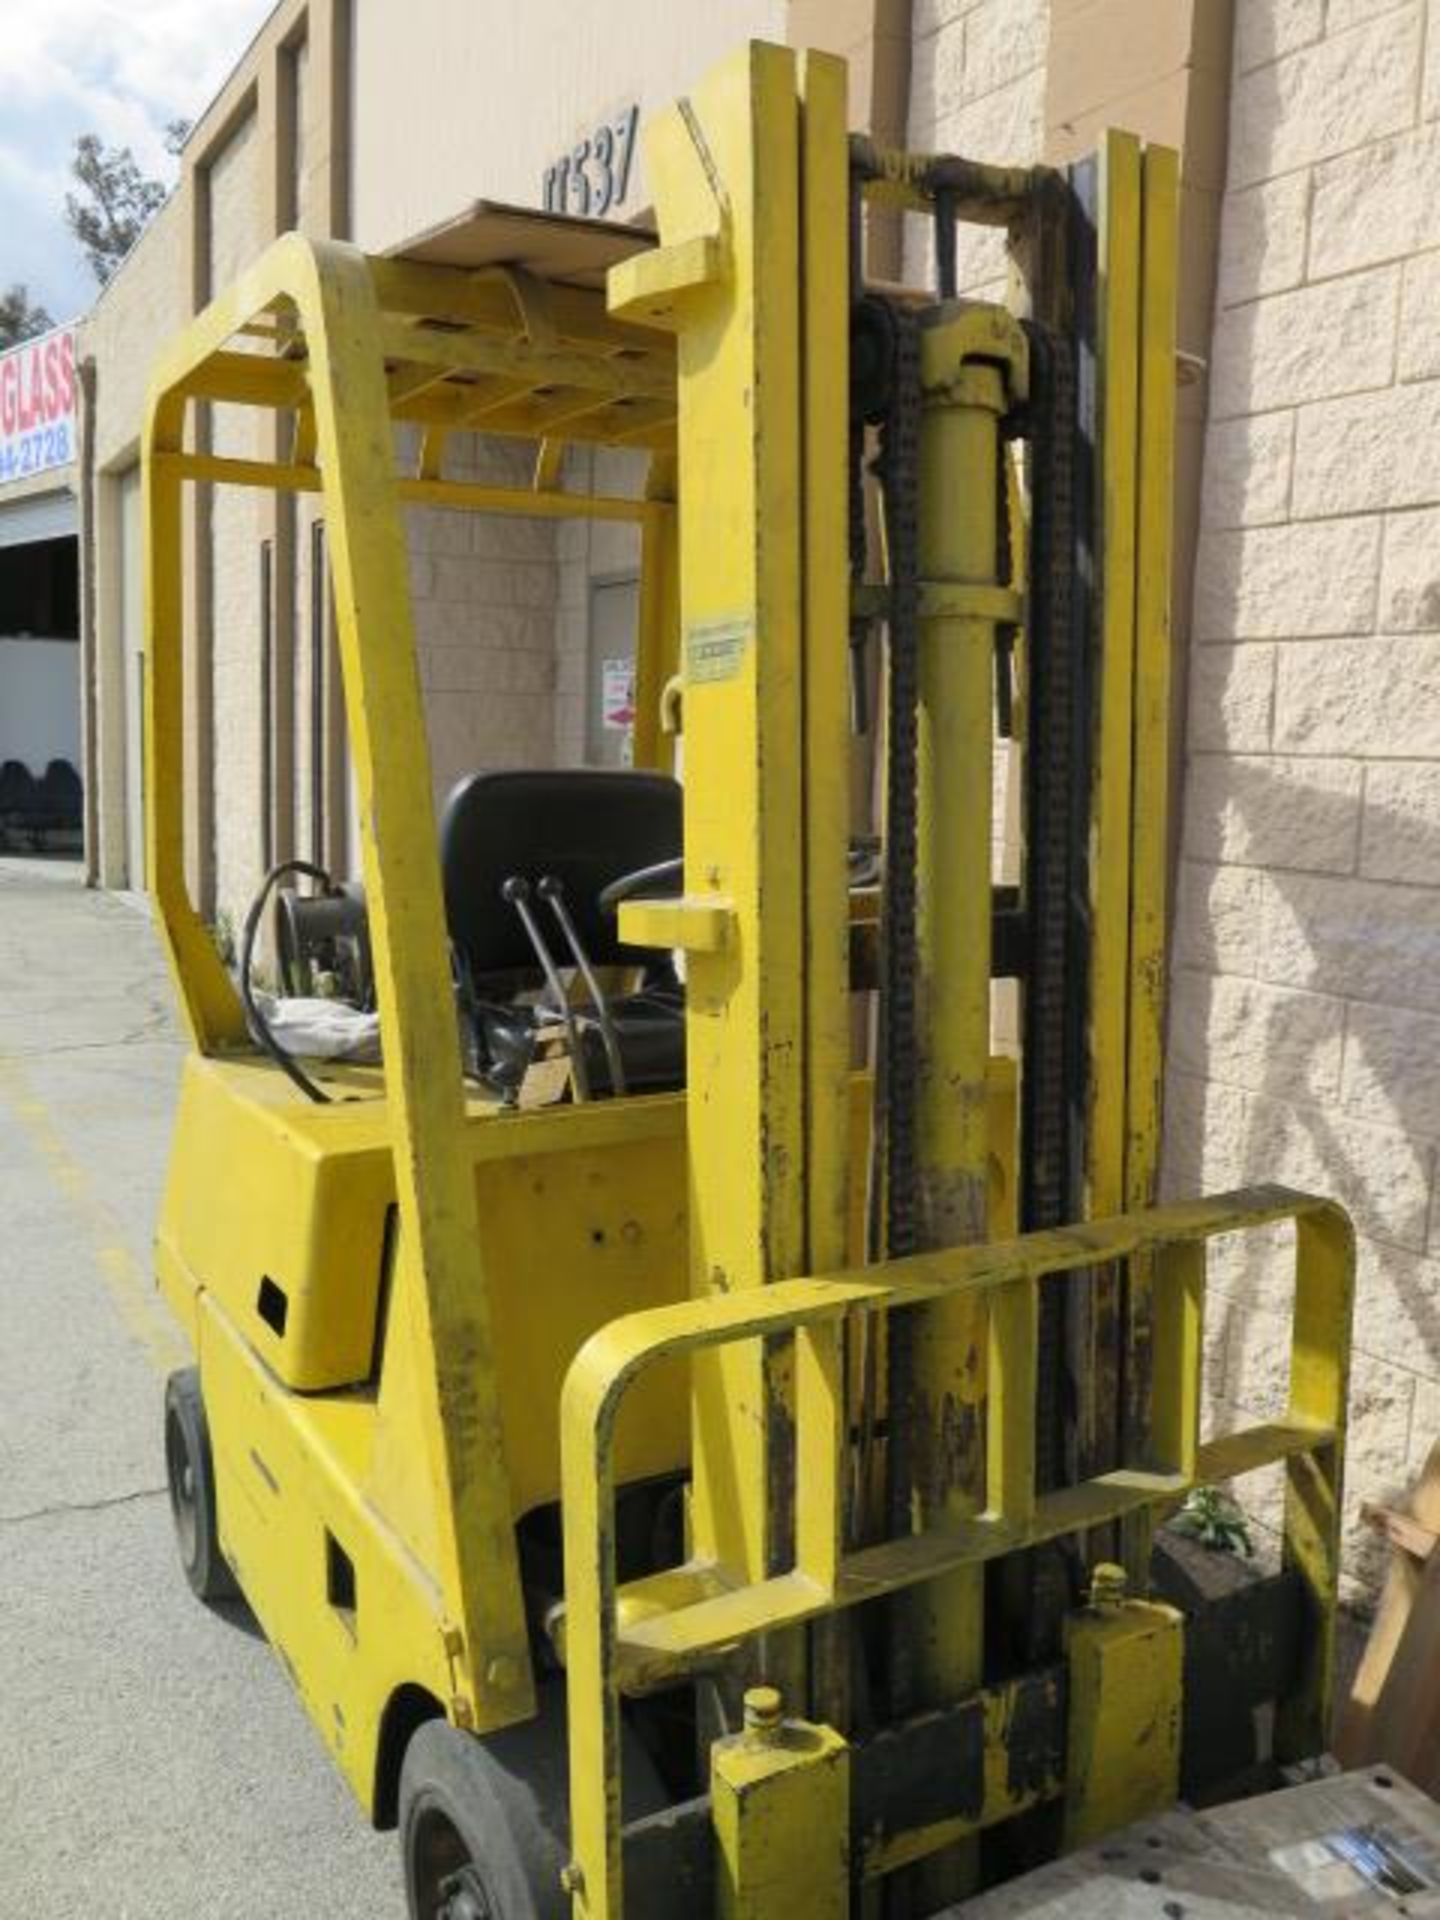 Toyota 2FGC20 4000 Lb Cap LPG Forklift s/n FGC20-12071 w/ 2-Stage Mast, 130” Lift Height, SOLD AS IS - Image 7 of 7